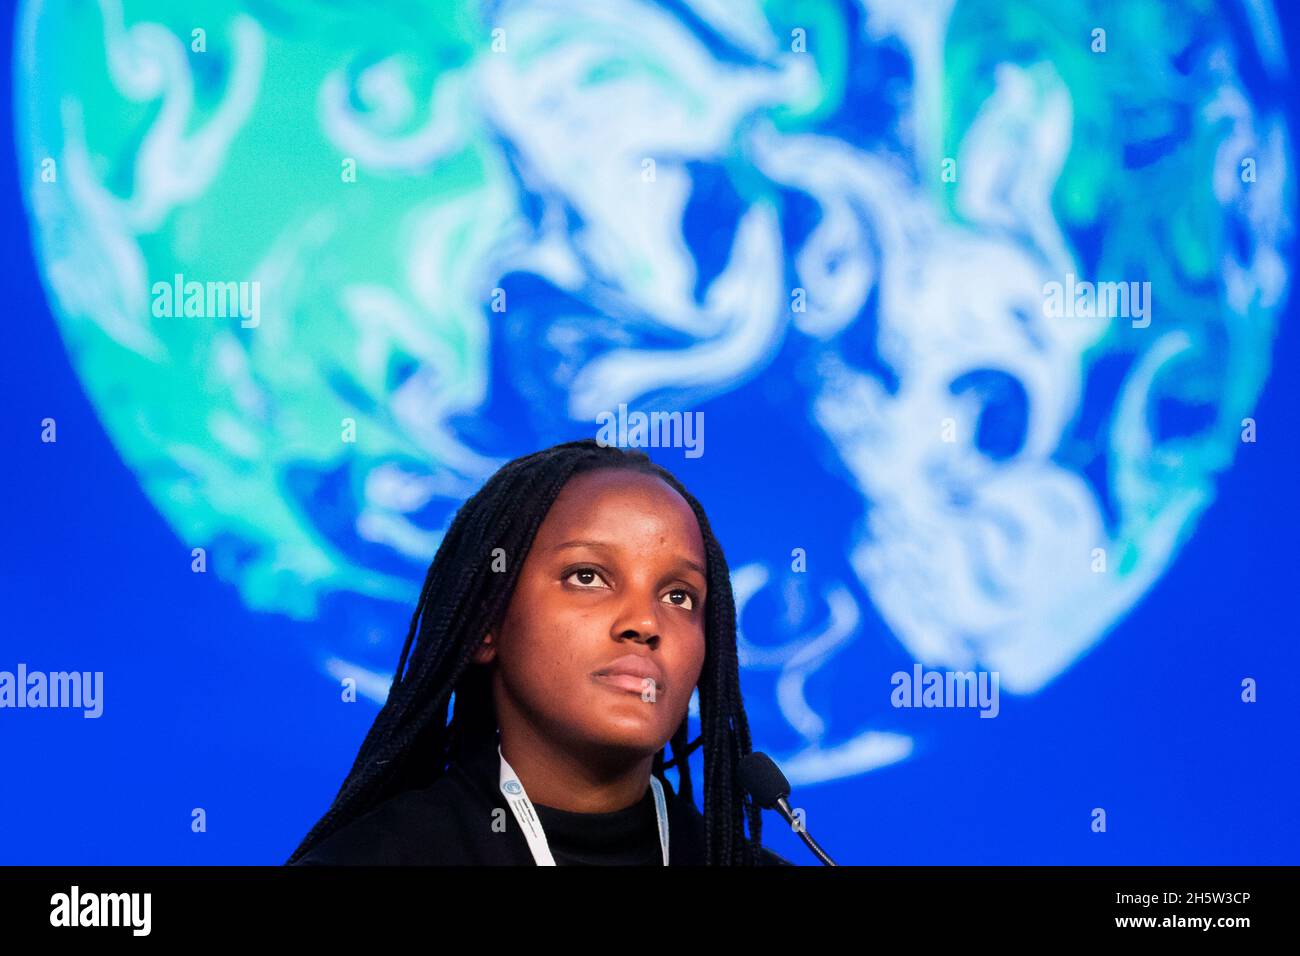 Glasgow, UK. 11th Nov, 2021. Vanessa Nakate, climate activist from Uganda, takes part in a panel discussion with Scottish First Minister Sturgeon at the UN Climate Change Conference COP26. The world climate conference is taking place in Glasgow. Around 200 countries are negotiating how to curb the global climate crisis and global warming. Credit: Christoph Soeder/dpa/Alamy Live News Stock Photo